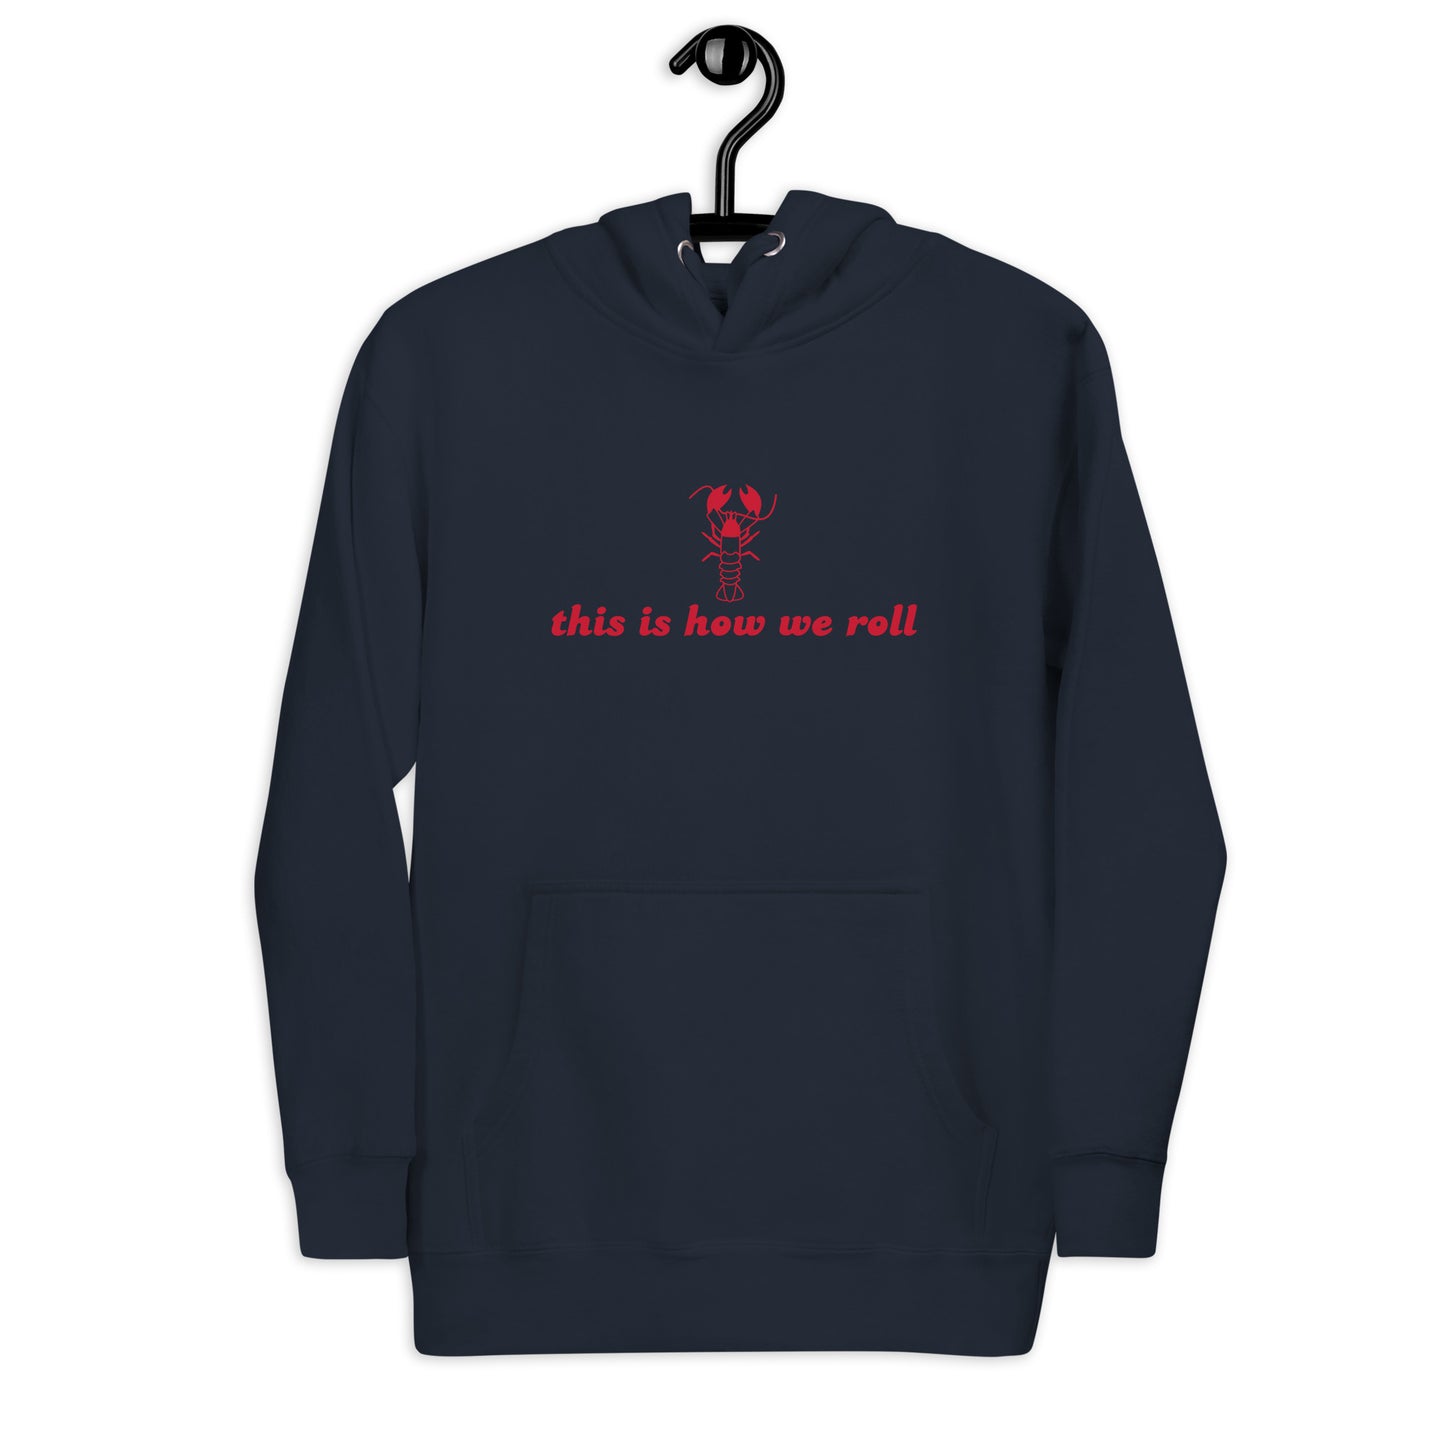 navy hoodie that says "this is how we roll" in red lettering with red lobster graphic